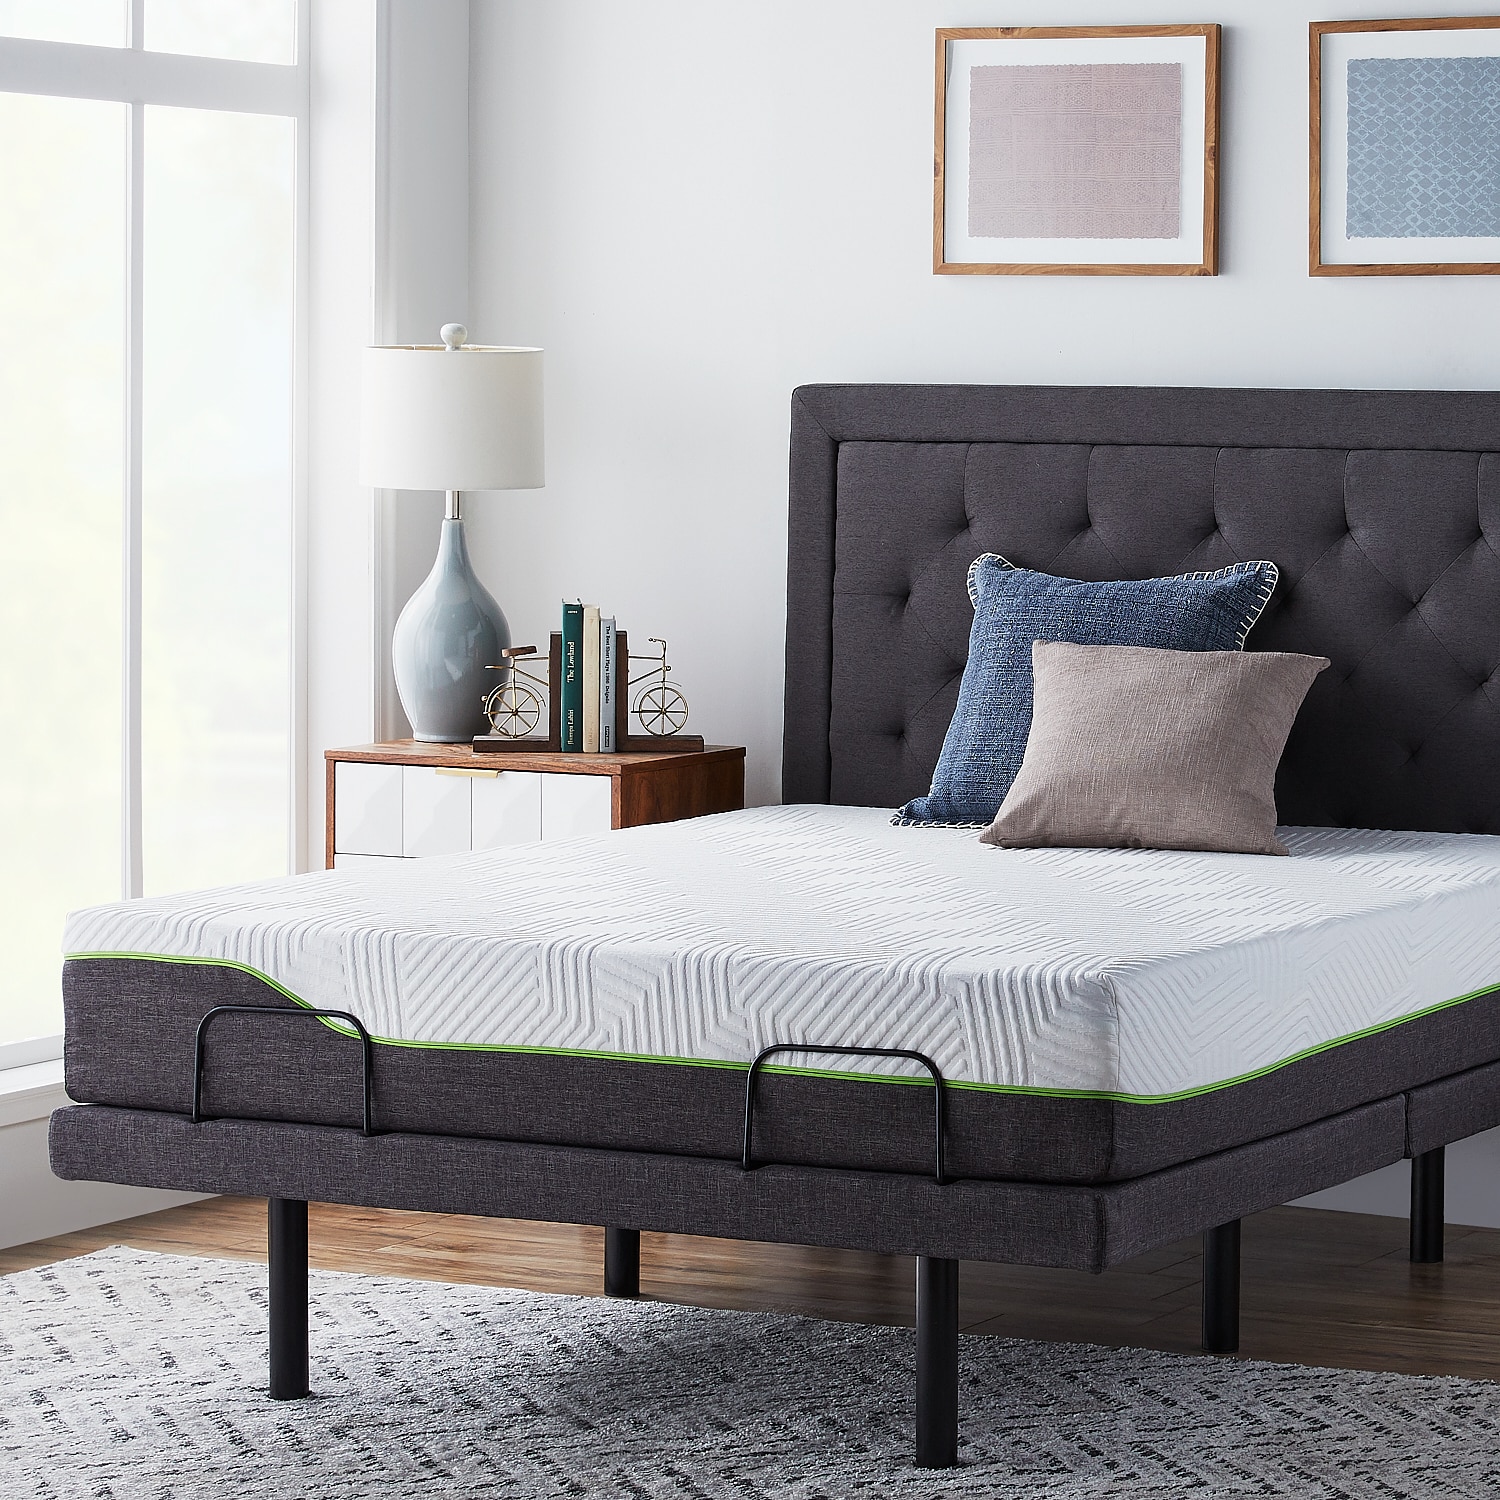 LUCID Comfort Collection Deluxe Adjustable Bed Base - On Sale - Bed Bath &  Beyond - 20616610